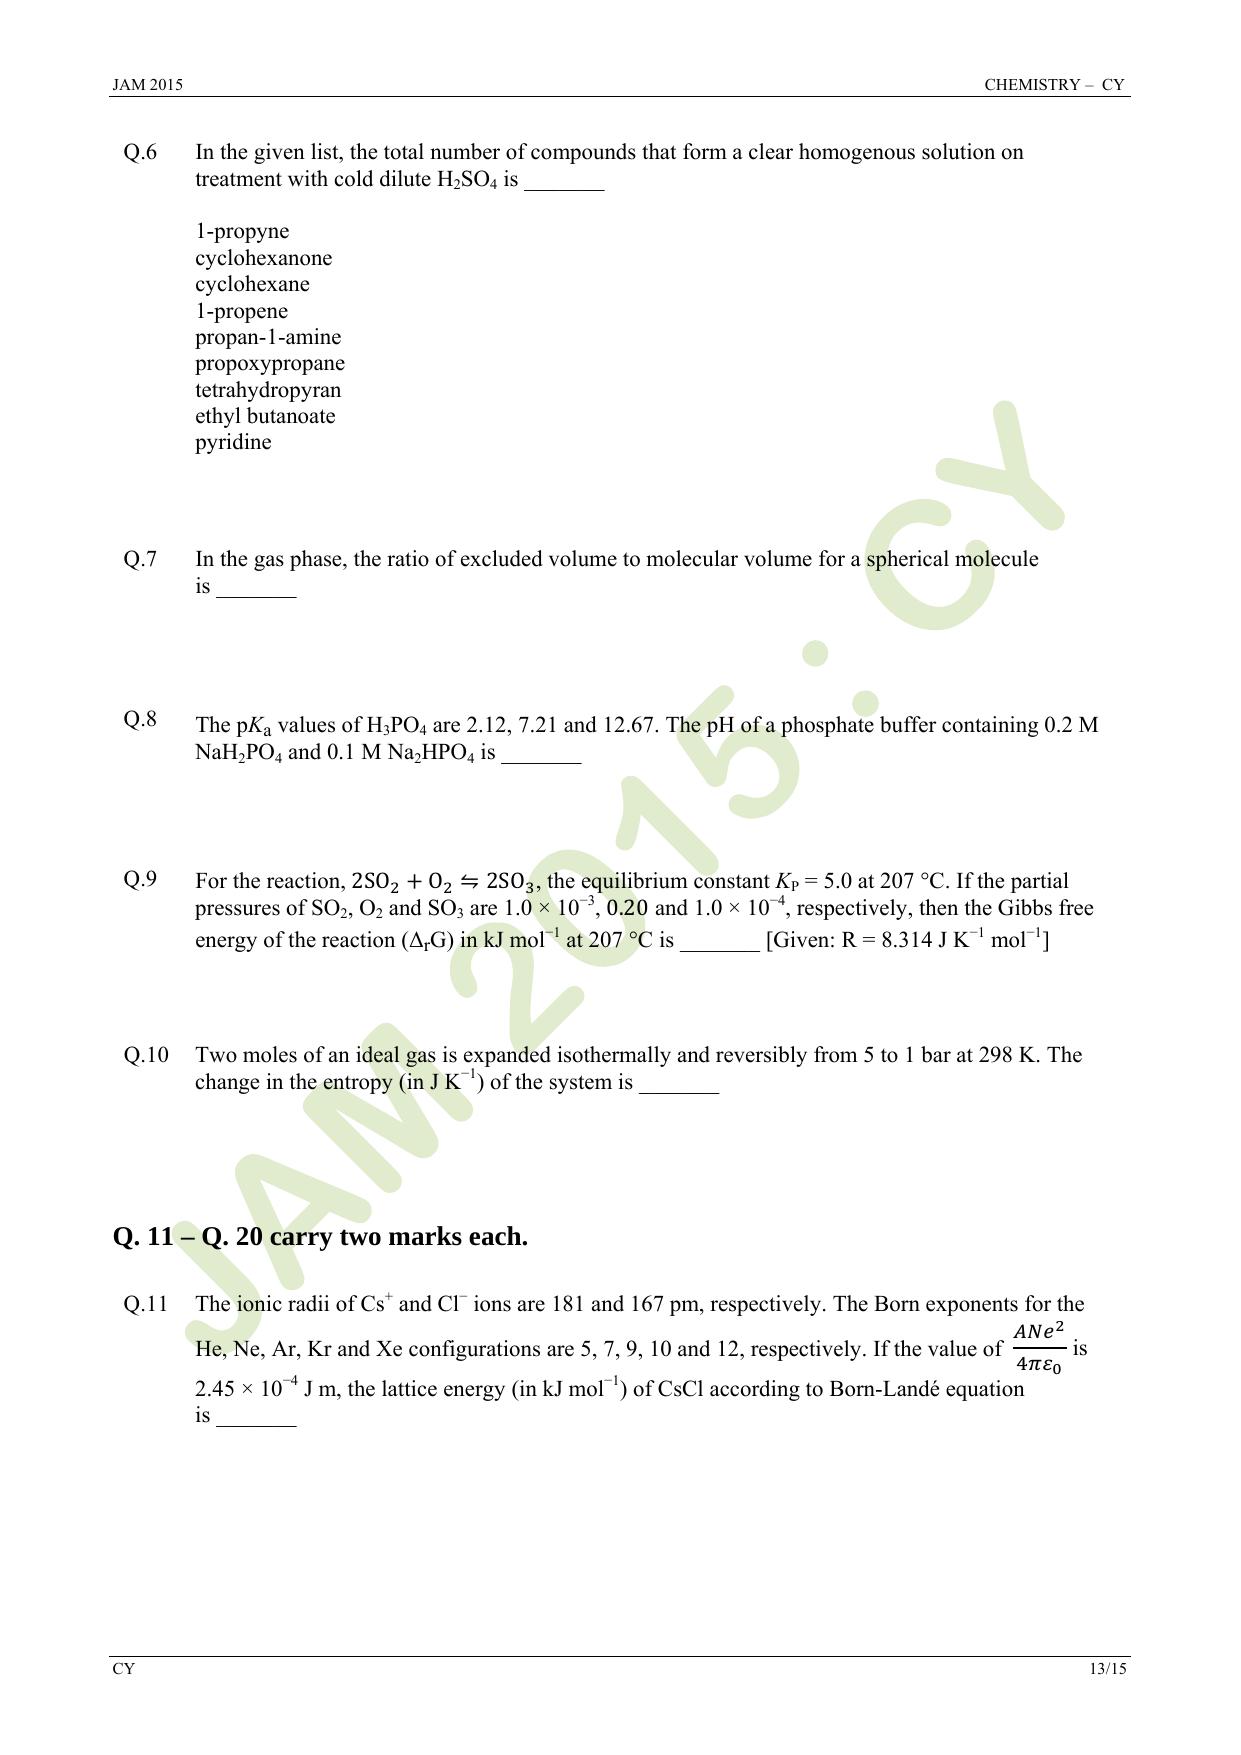 JAM 2015: CY Question Paper - Page 13